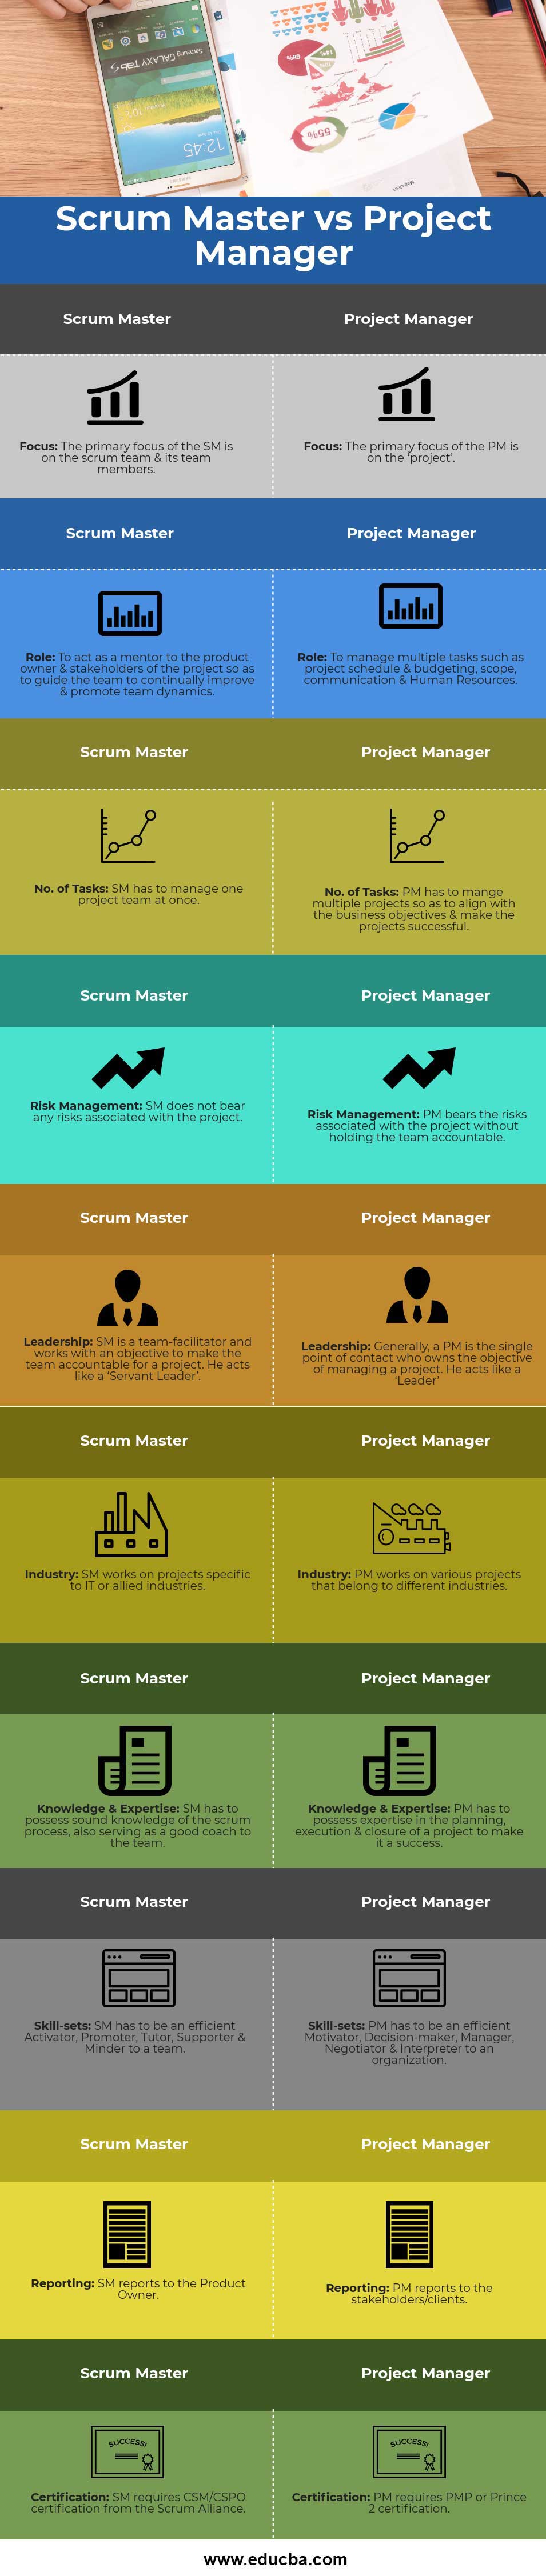 Scrum-Master-vs-Project-Manager-info